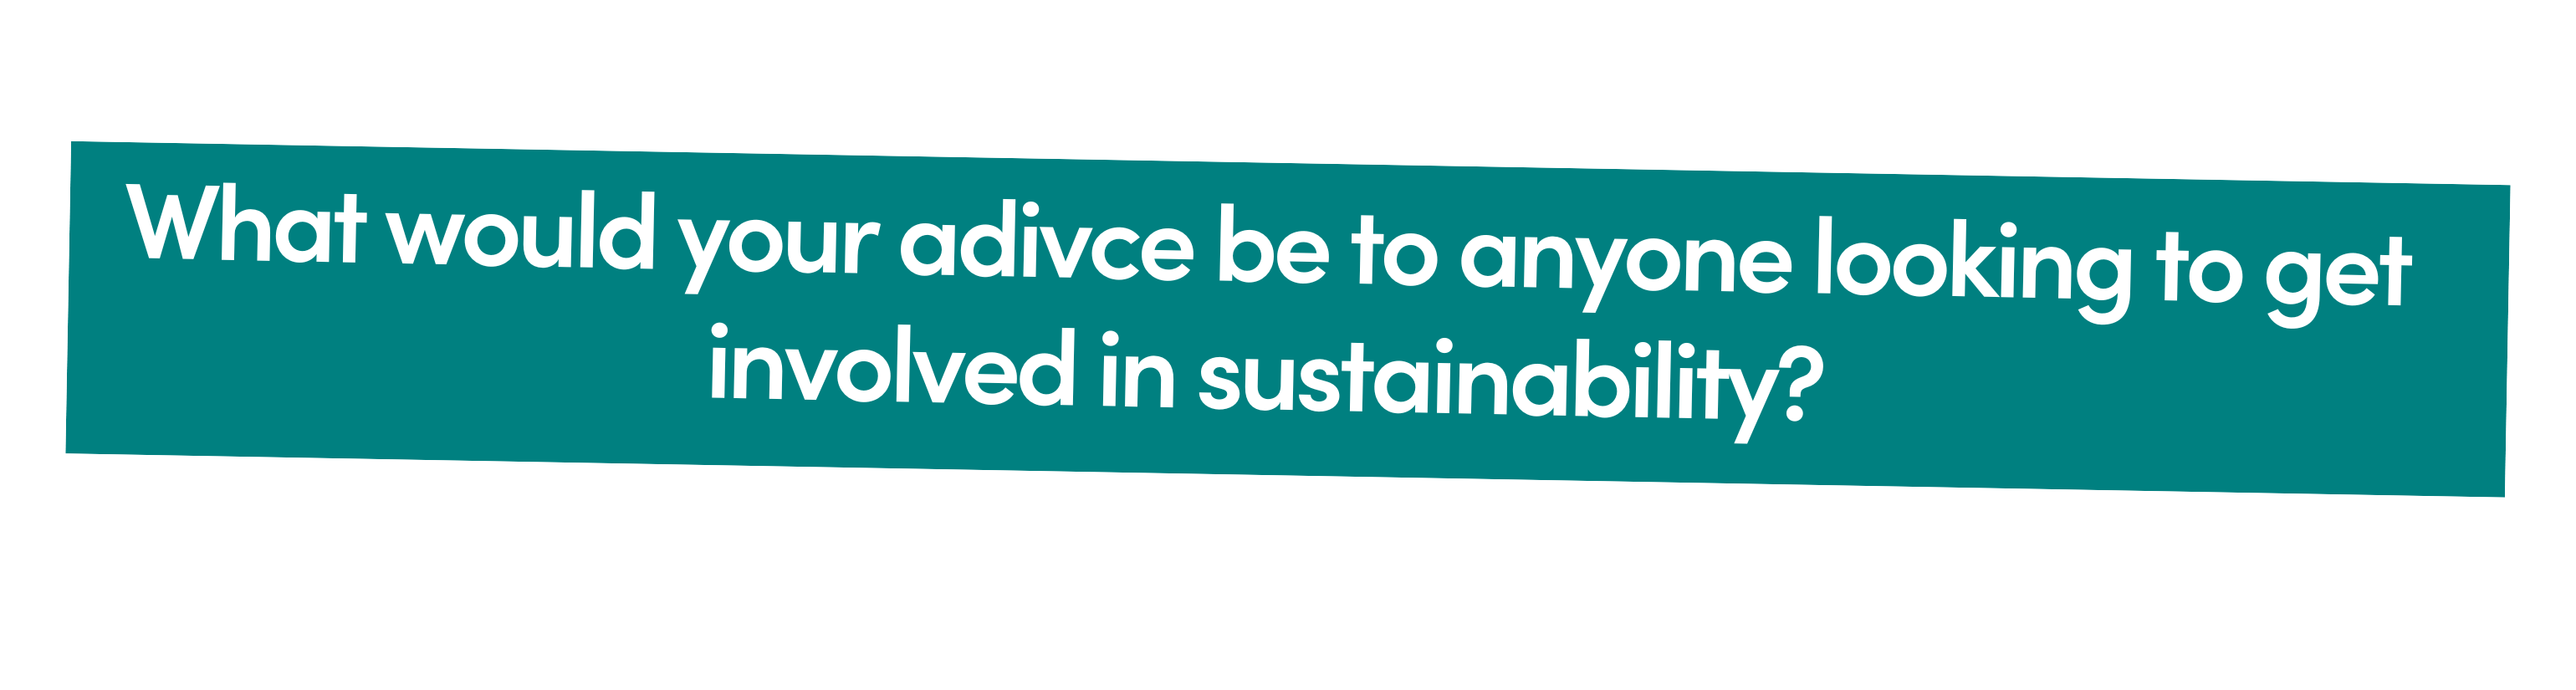 What would your adivce be to anyone looking to get involved in sustainability?